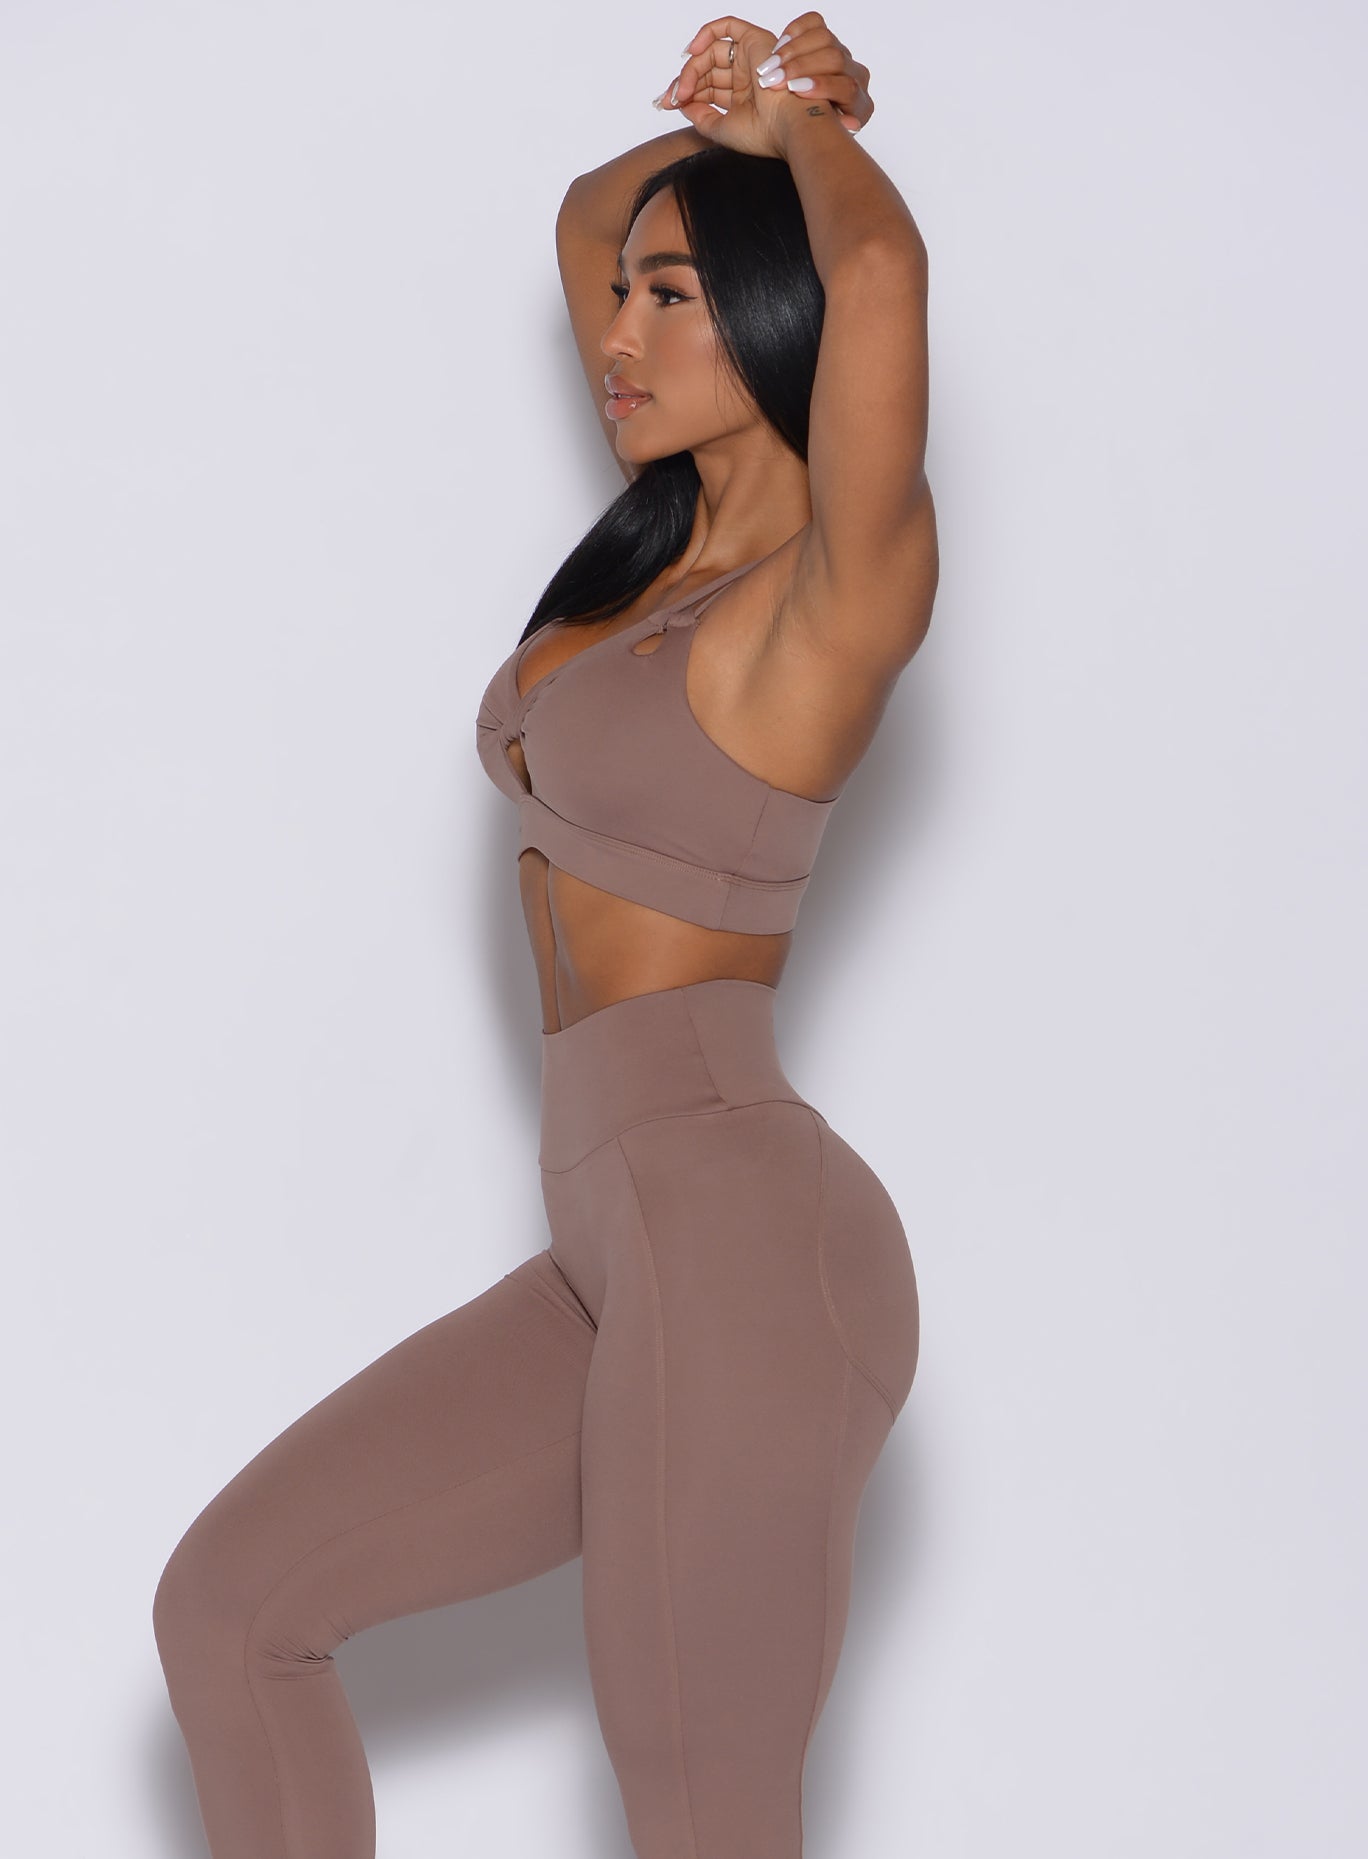 Left side profile view of a model with both her hand over her head wearing our twist sports bra in tan color and a matching leggings